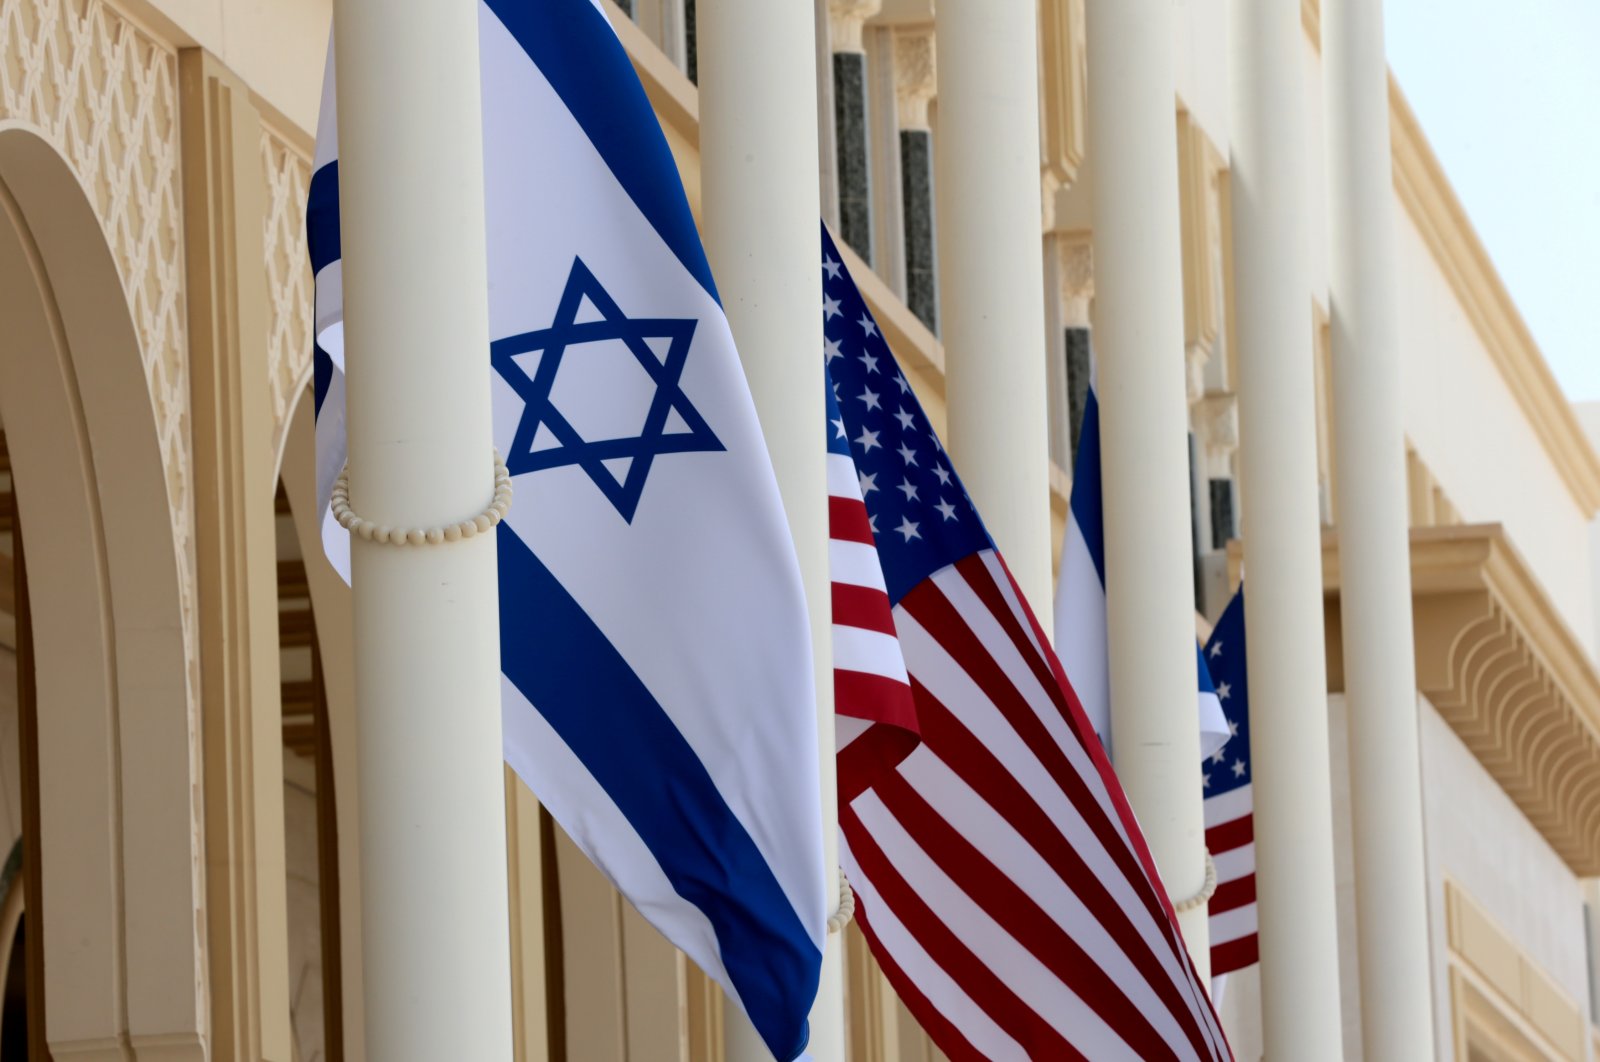 An Israeli flag and an American flag fly at Abu Dhabi International Airport before the arrival of Israeli and U.S. officials, in Abu Dhabi, United Arab Emirates (UAE), Aug. 31, 2020. (Reuters Photo)